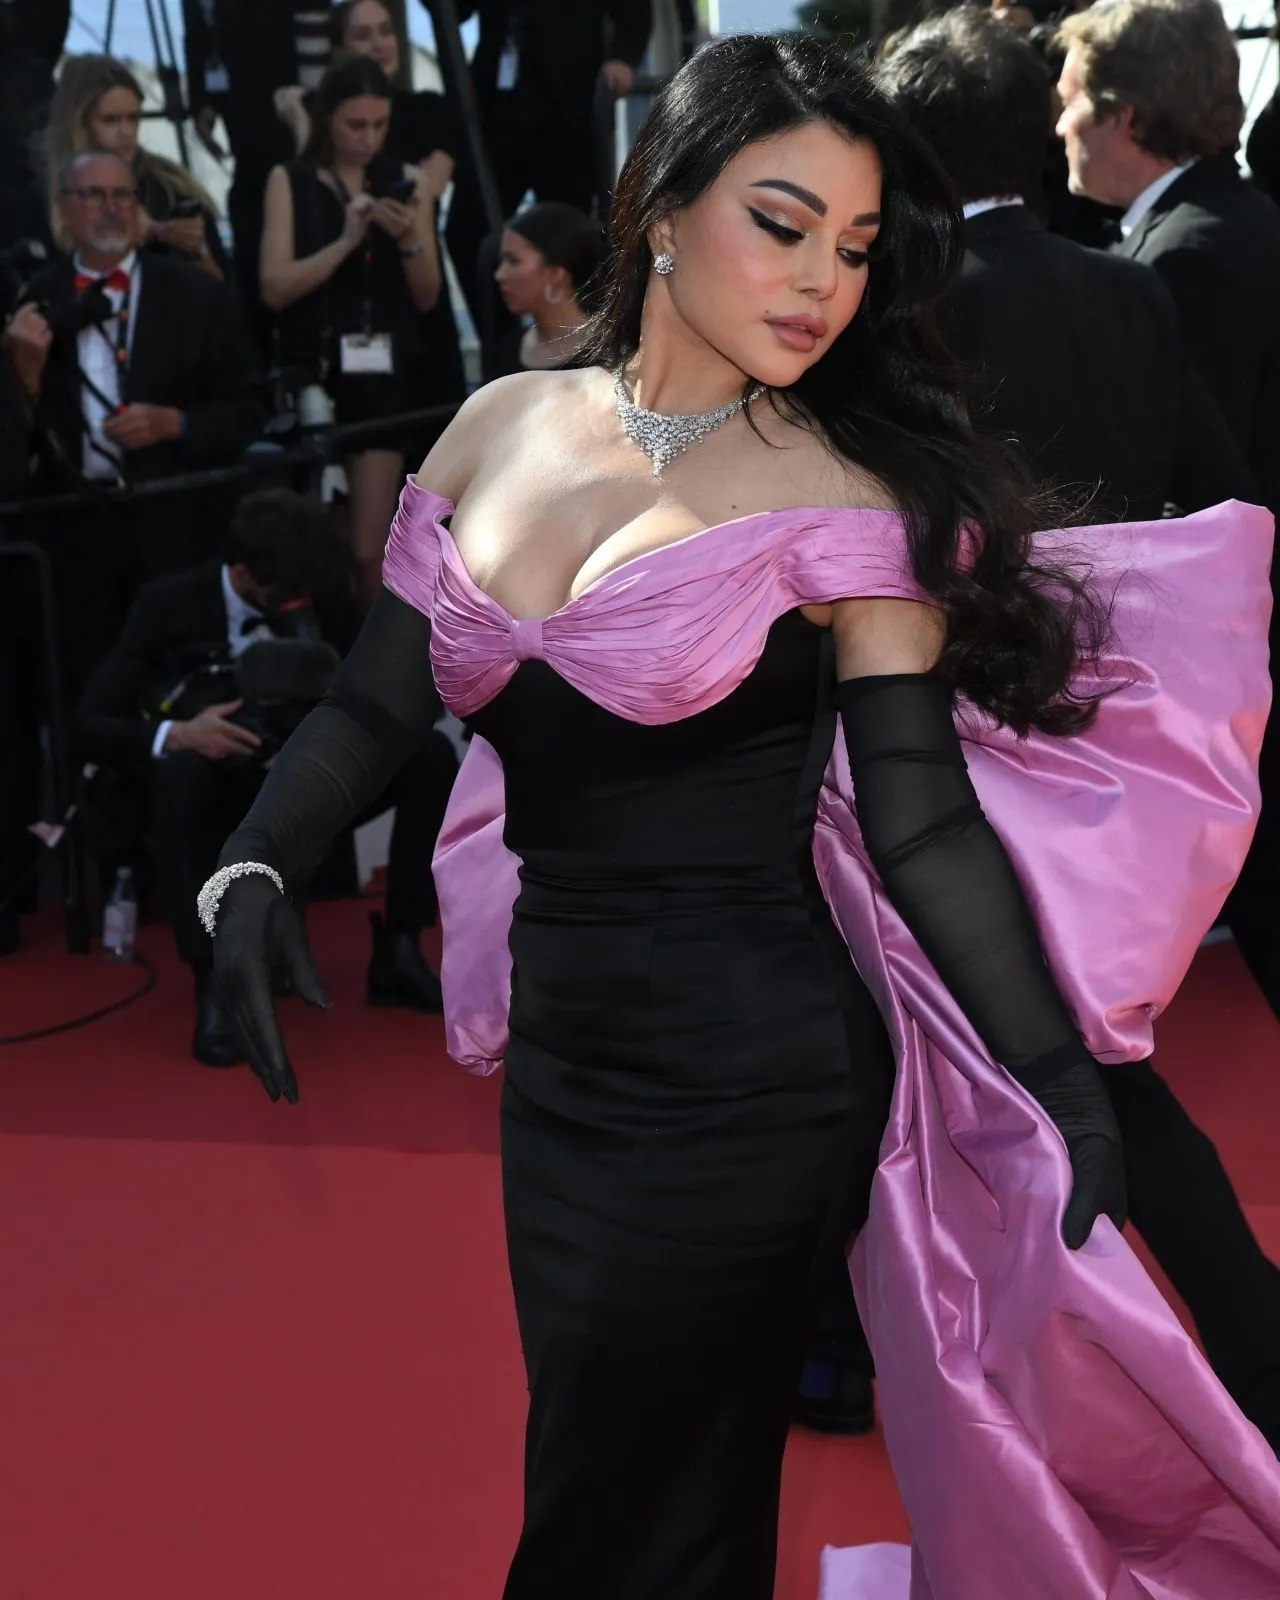 HAIFA WEHBE AT THE COUNT OF MONTE CRISTO PREMIERE AT CANNES FILM FESTIVAL2